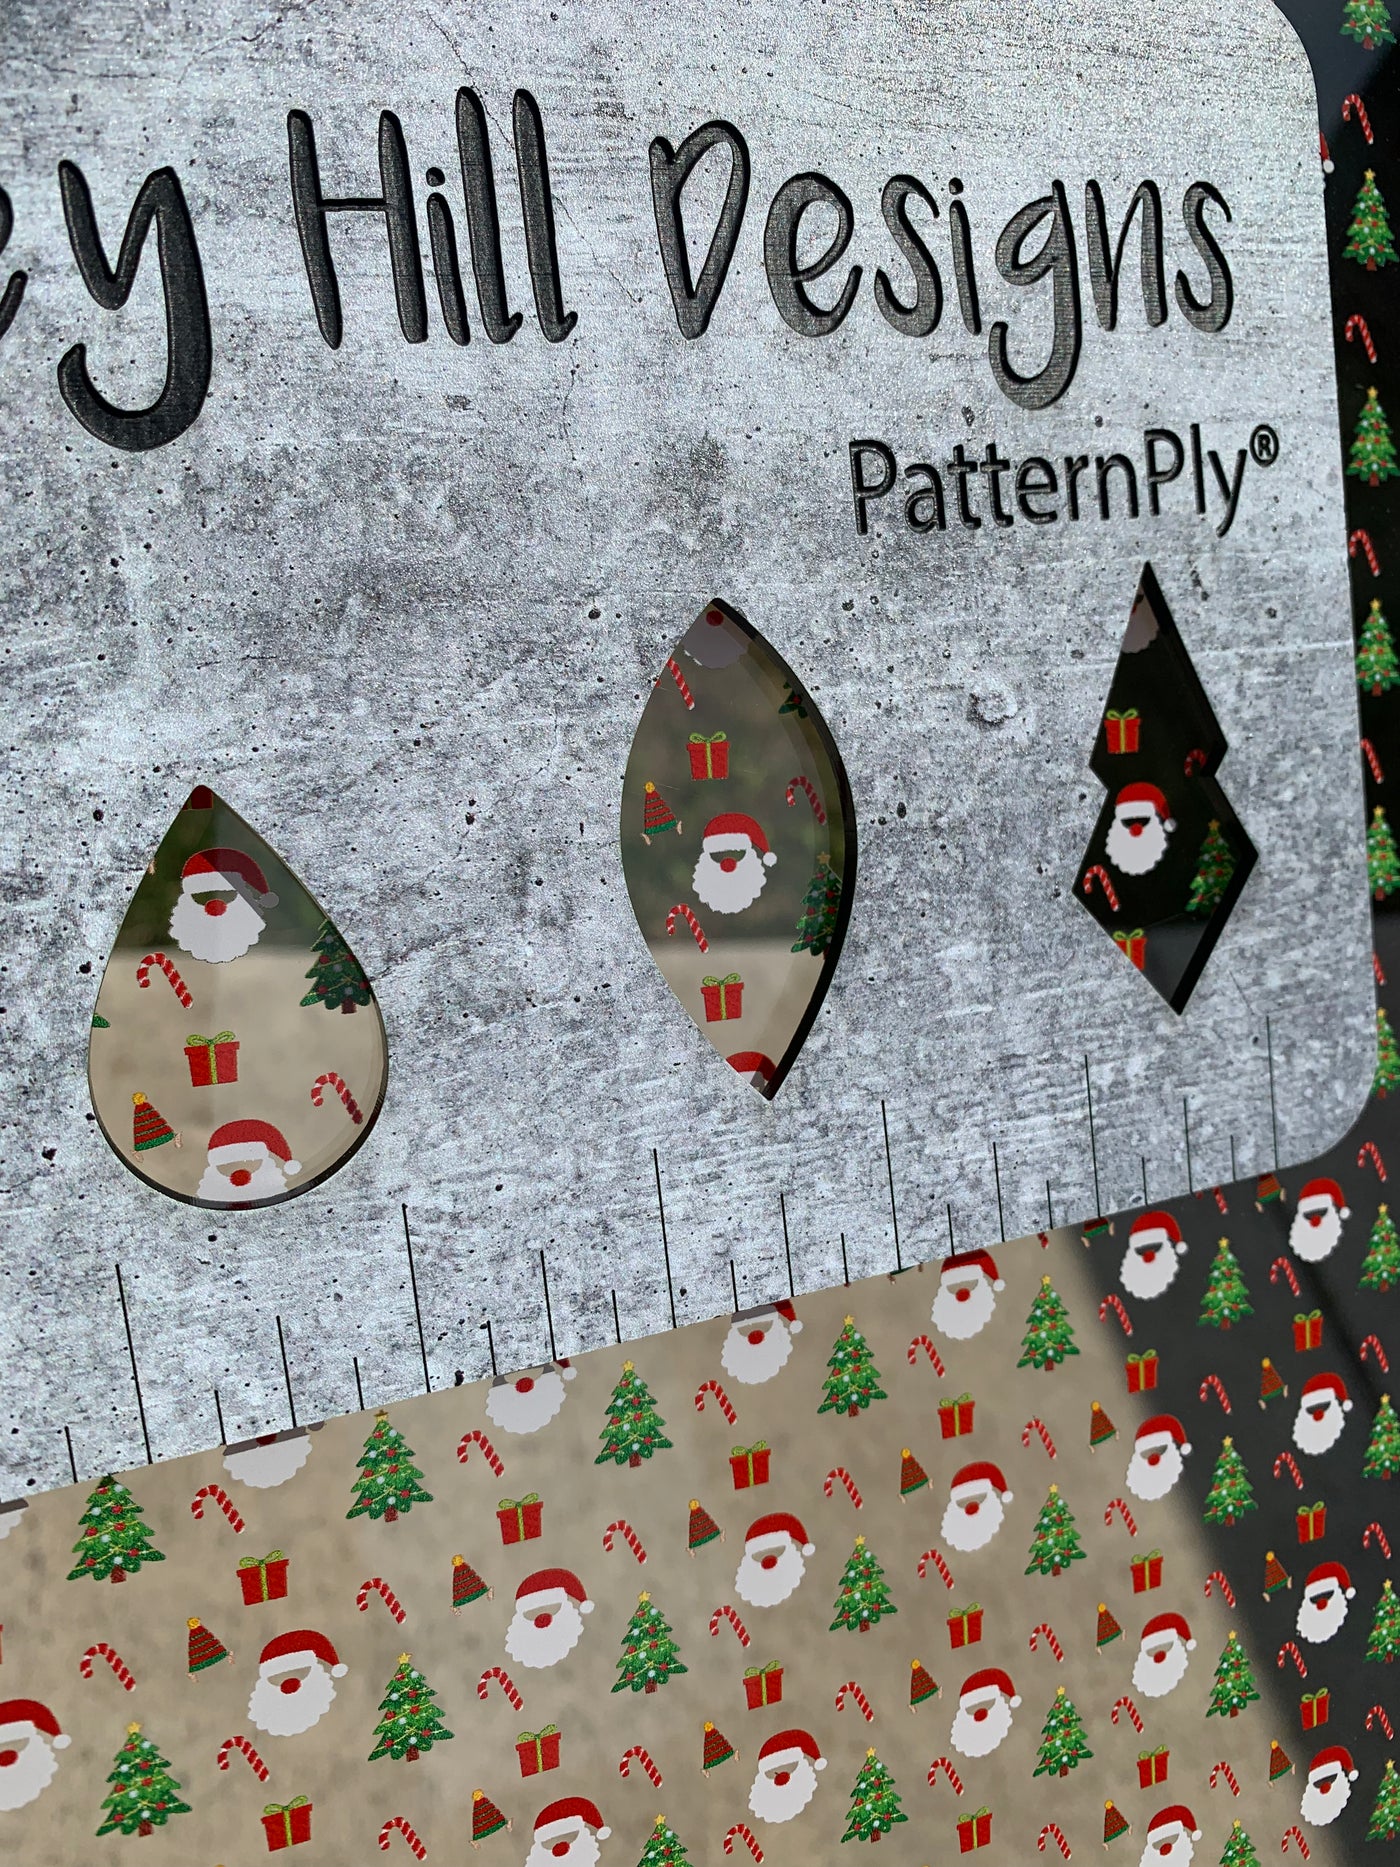 PatternPly® Scattered Christmas Symbols